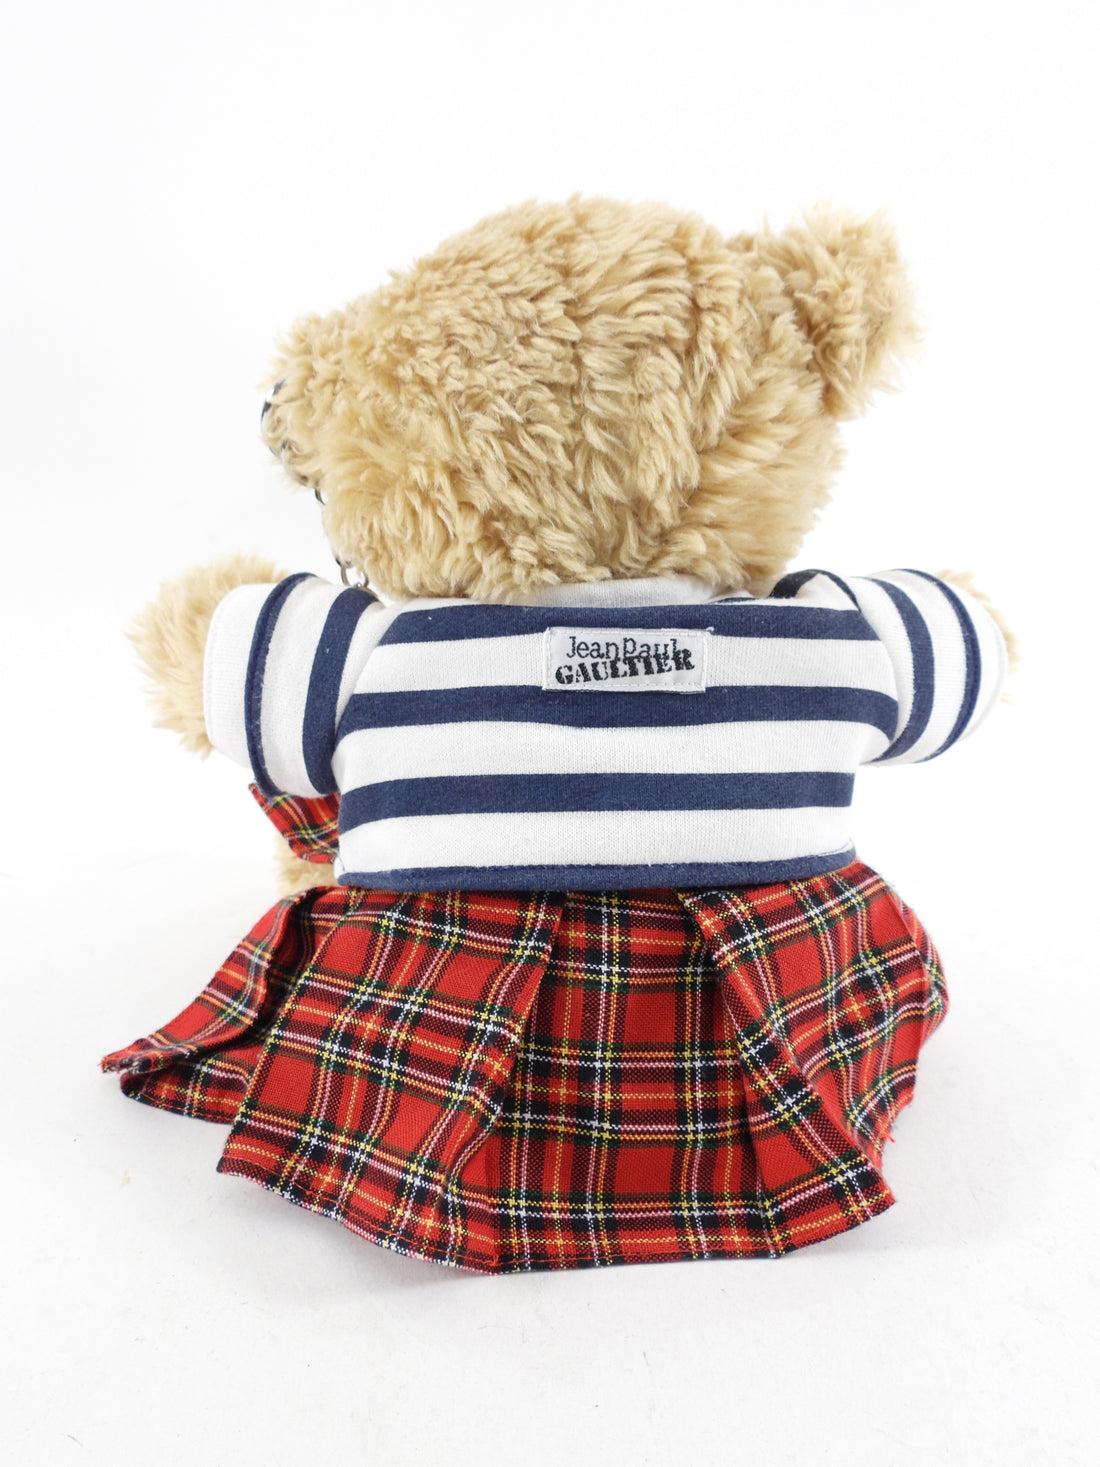 Jean Paul Gaultier Teddy Bear with Striped T-Shirt.  Plush novelty bear with chain detail, kilt, and t-shirt.

NEW in bag!

In 2012 the De Young Museum in San Francisco featured a very large exhibit of his work and along with that came the release